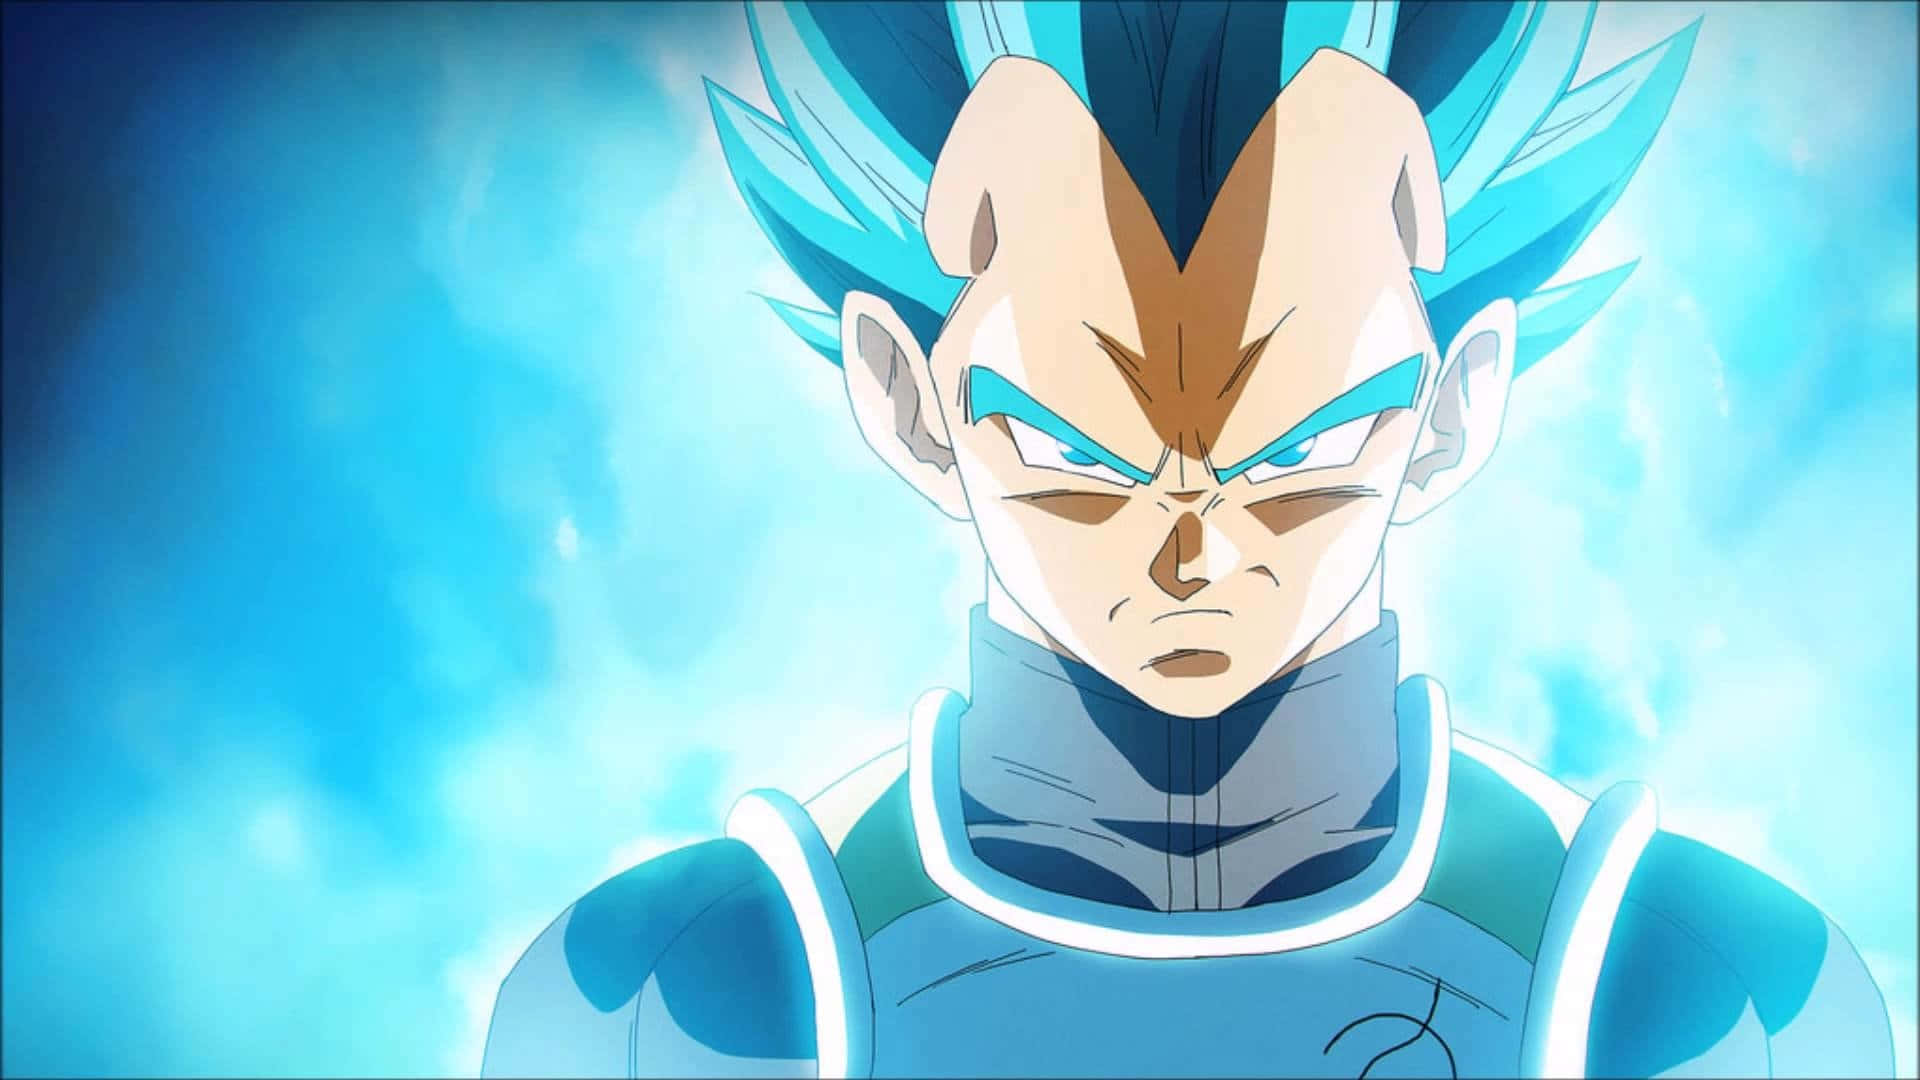 Show off your love for the legendary anime character Vegeta with this Cool Vegeta wallpaper Wallpaper